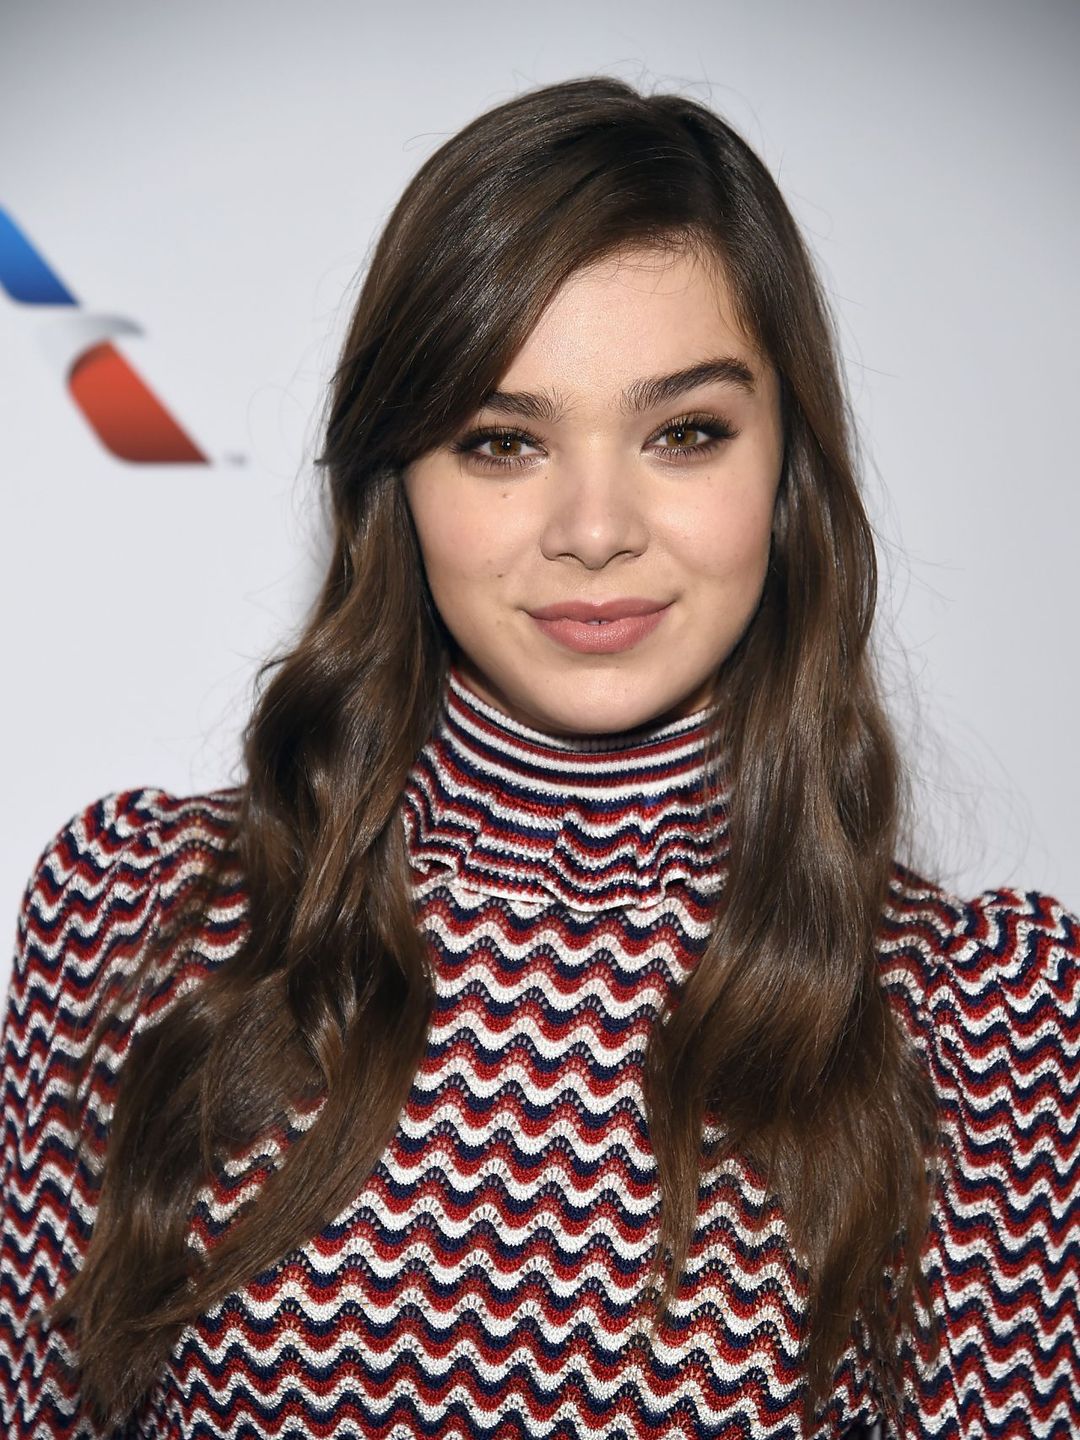 Hailee Steinfeld young photos